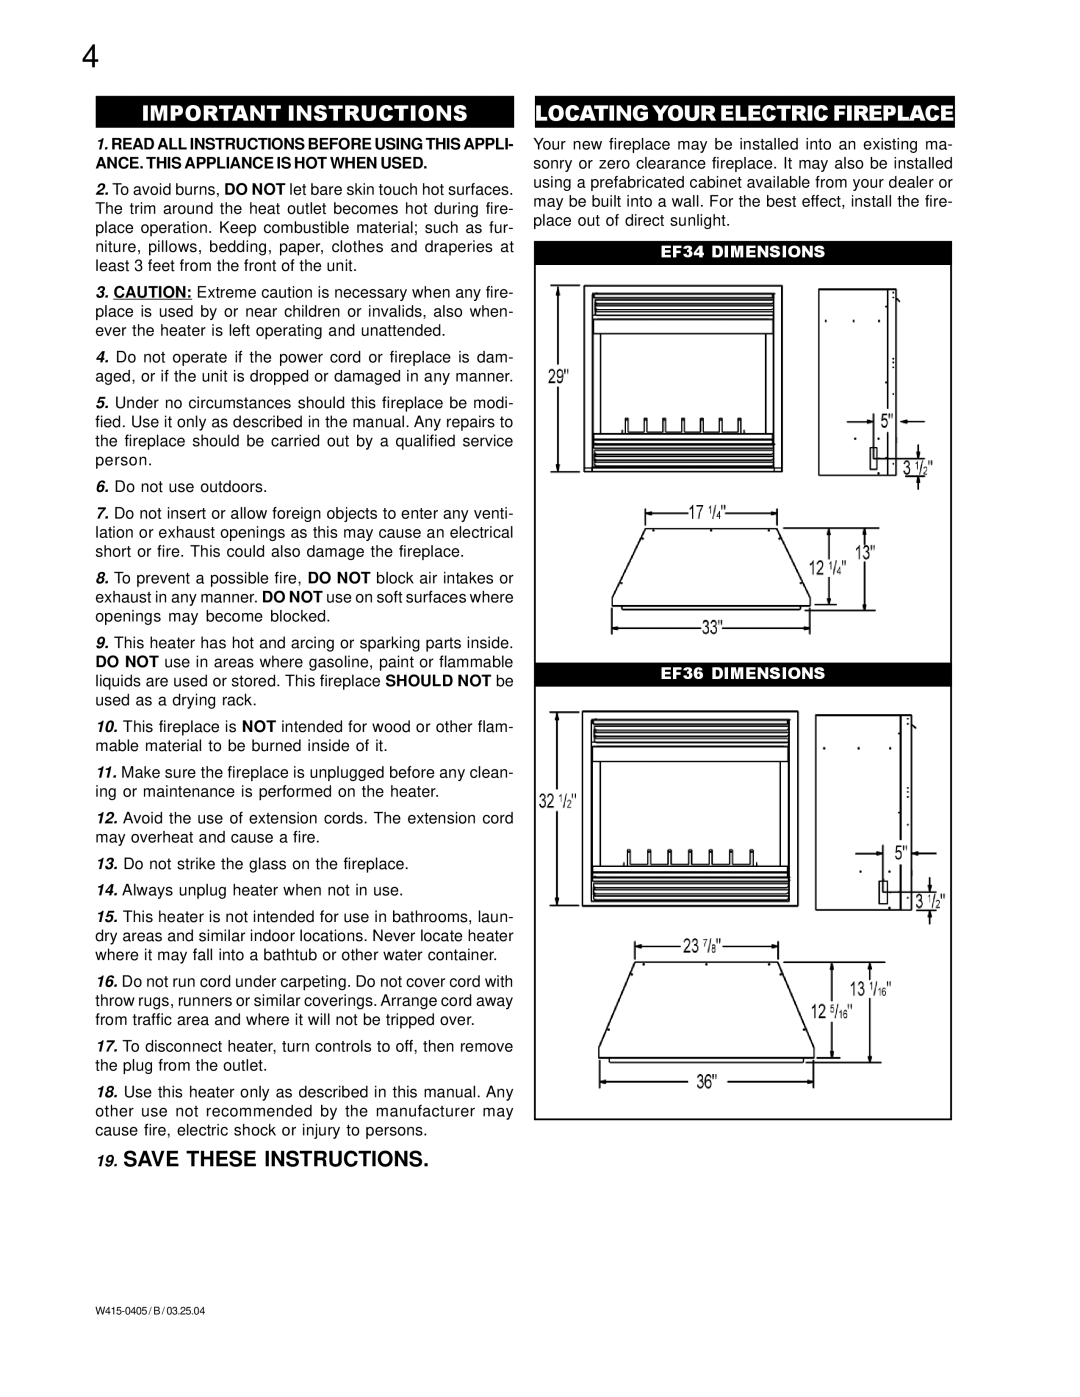 Napoleon Fireplaces EF34H, EF36H manual Important Instructions, Locatingyour Electric Fireplace, Save These Instructions 